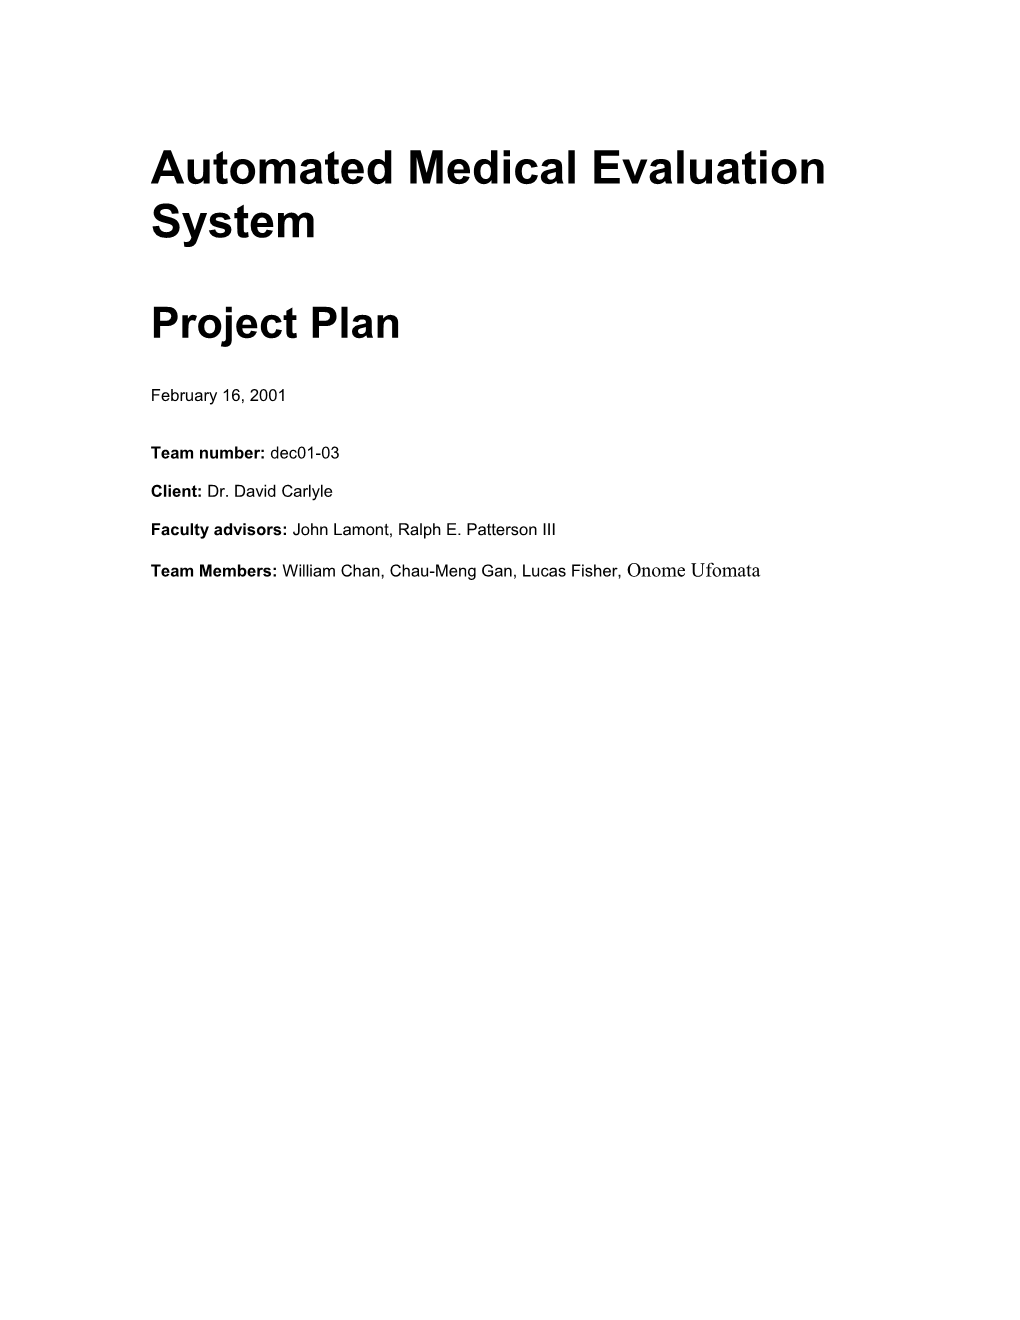 Automated Medical Evaluation System